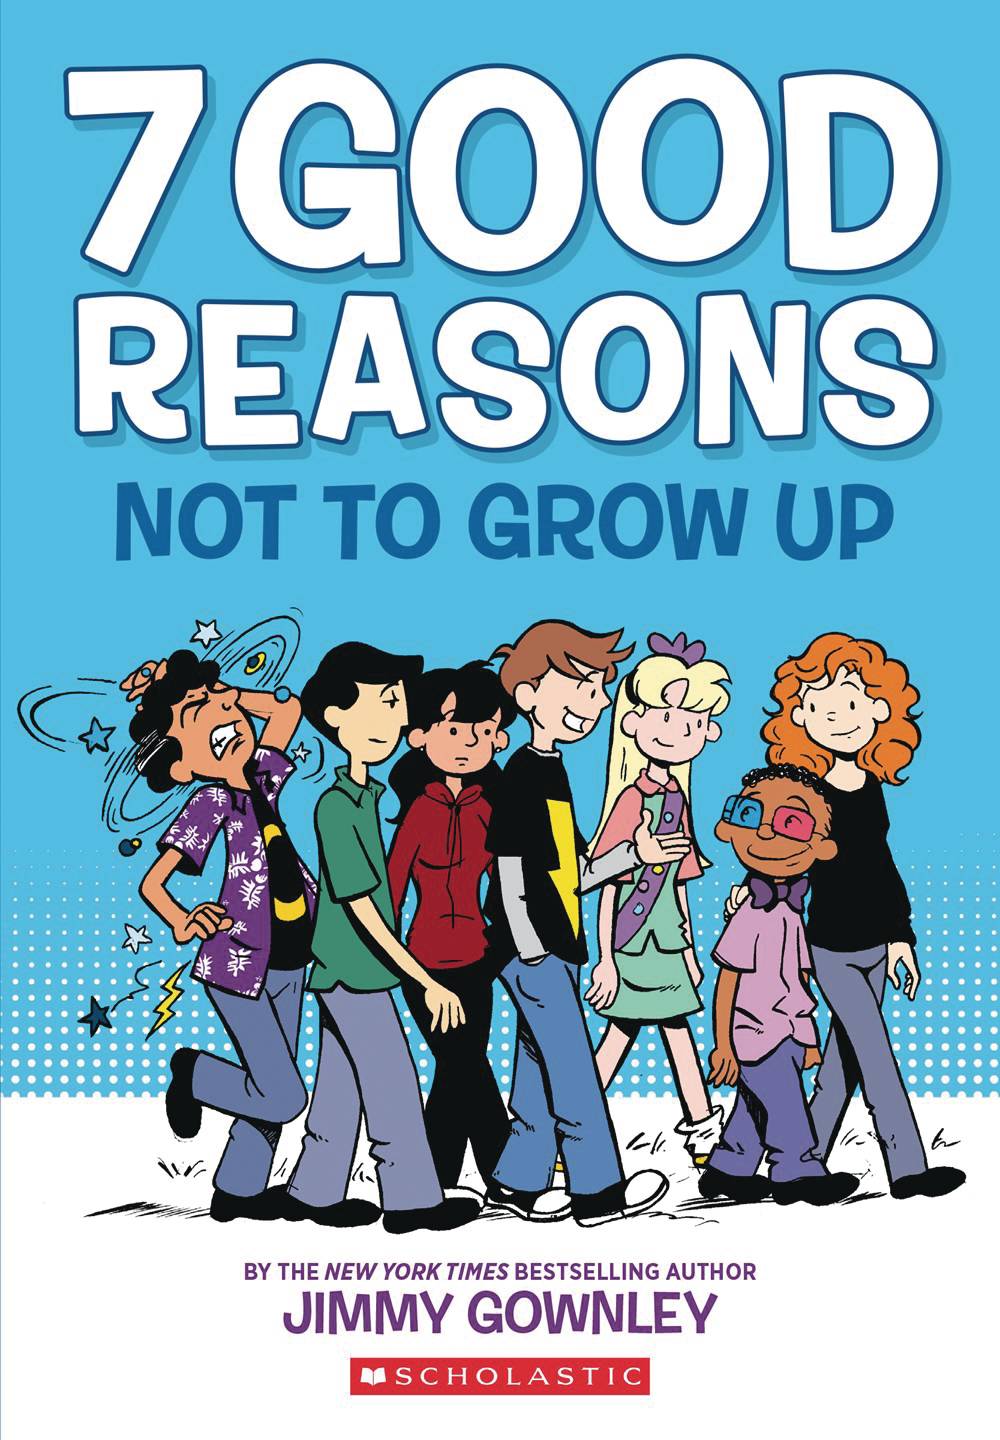 7 Good Reasons Not to Grow